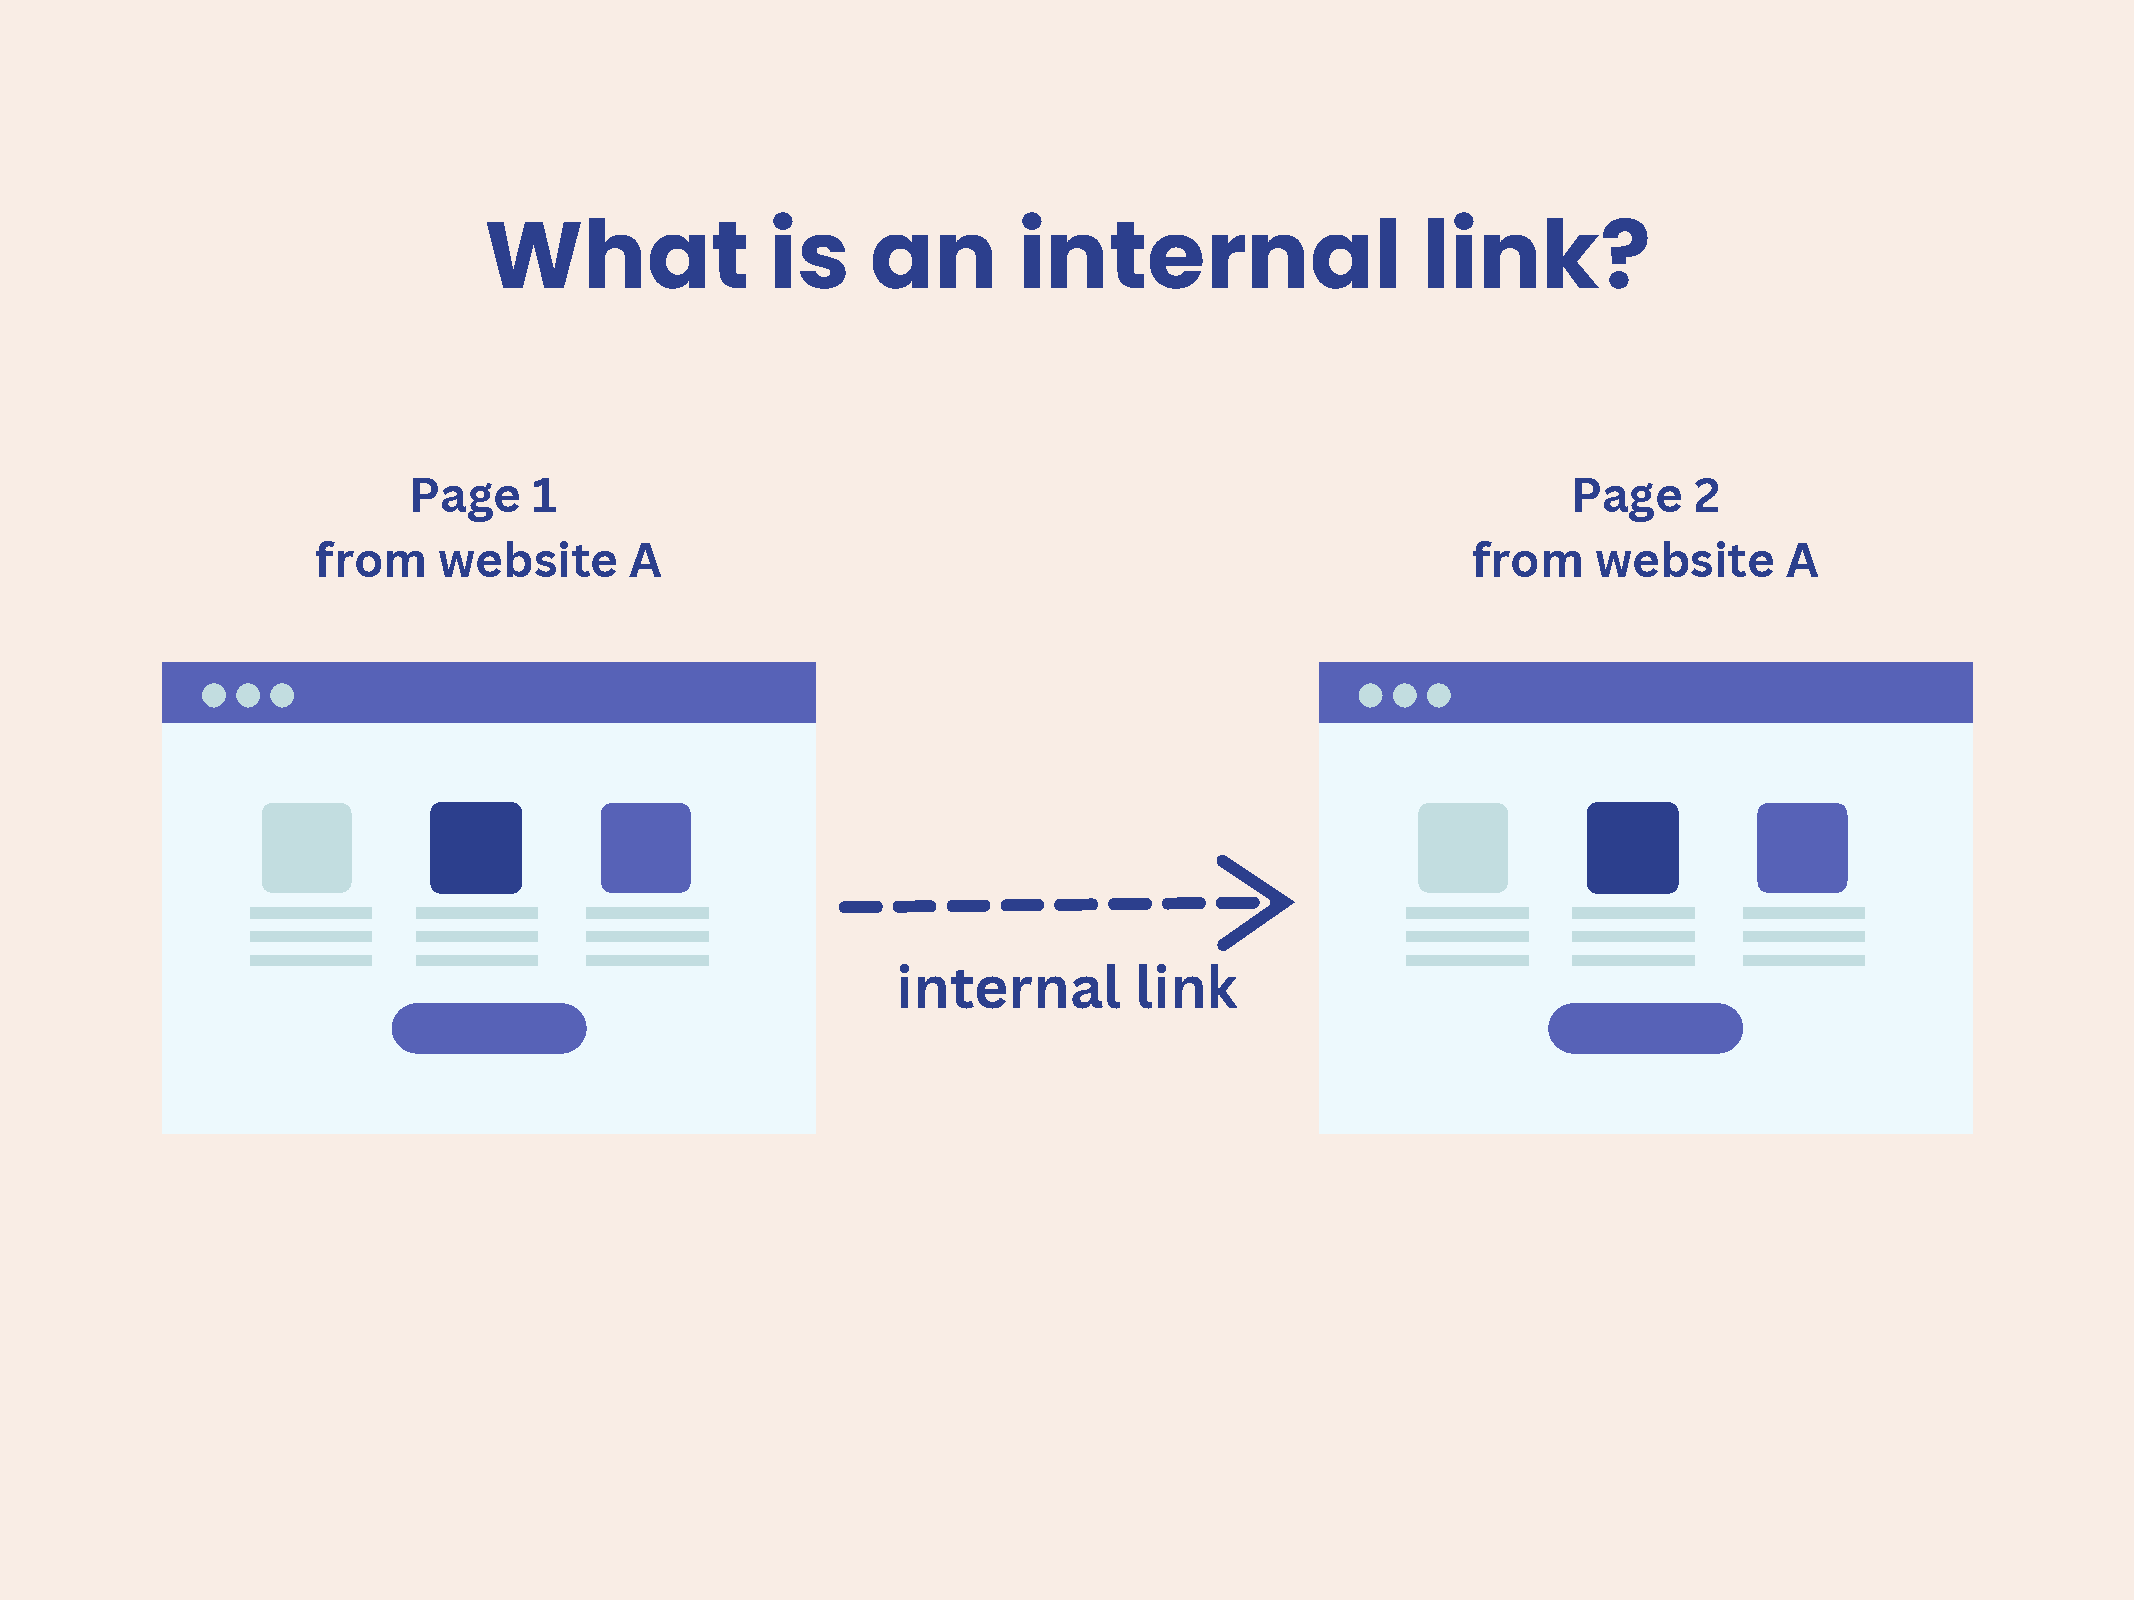 What is an internal link?